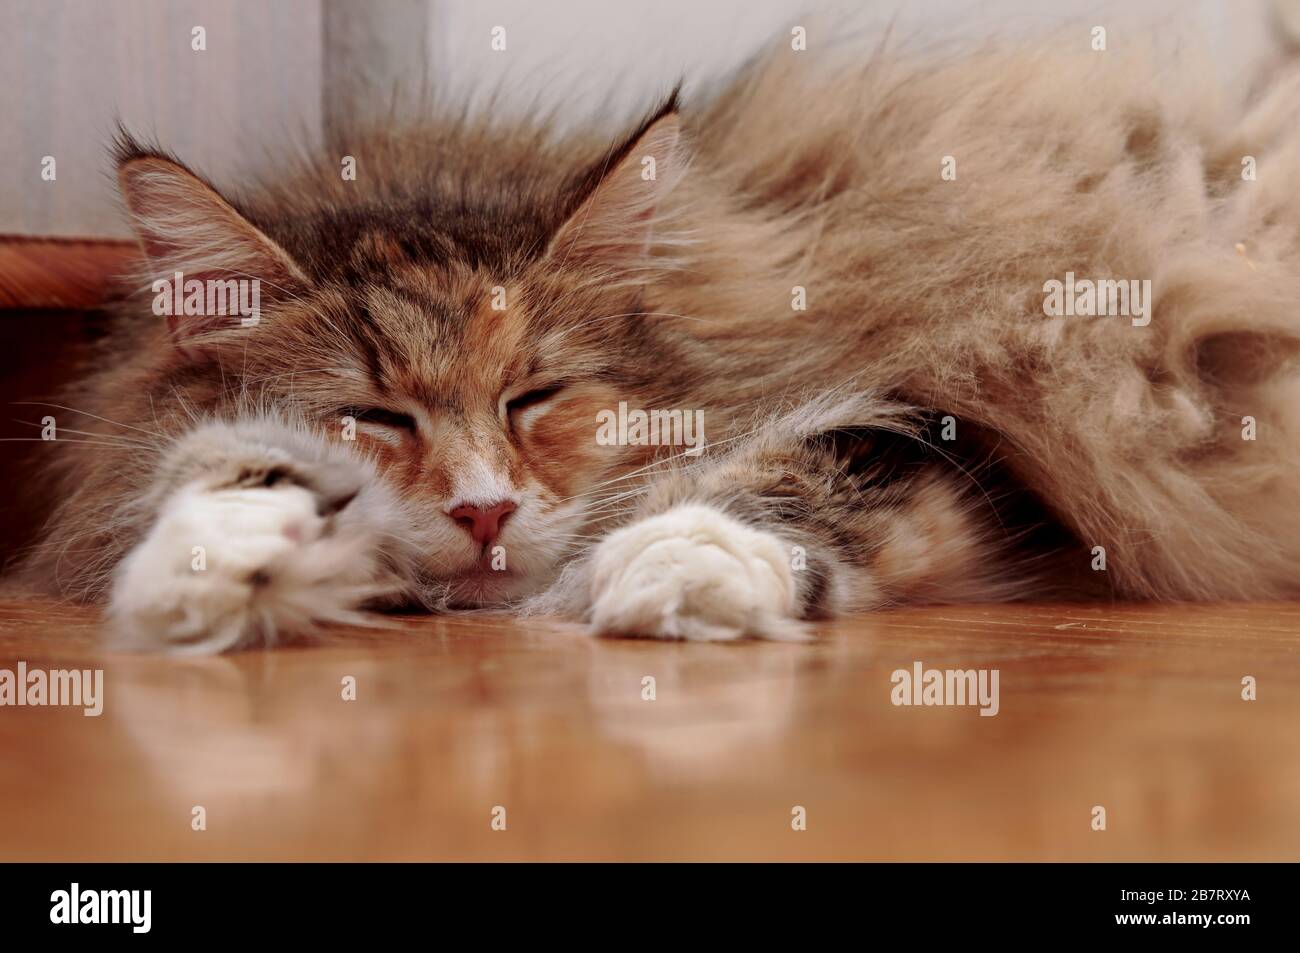 A sweet norwegian forest cat lying on a shiny floor indoors Stock Photo